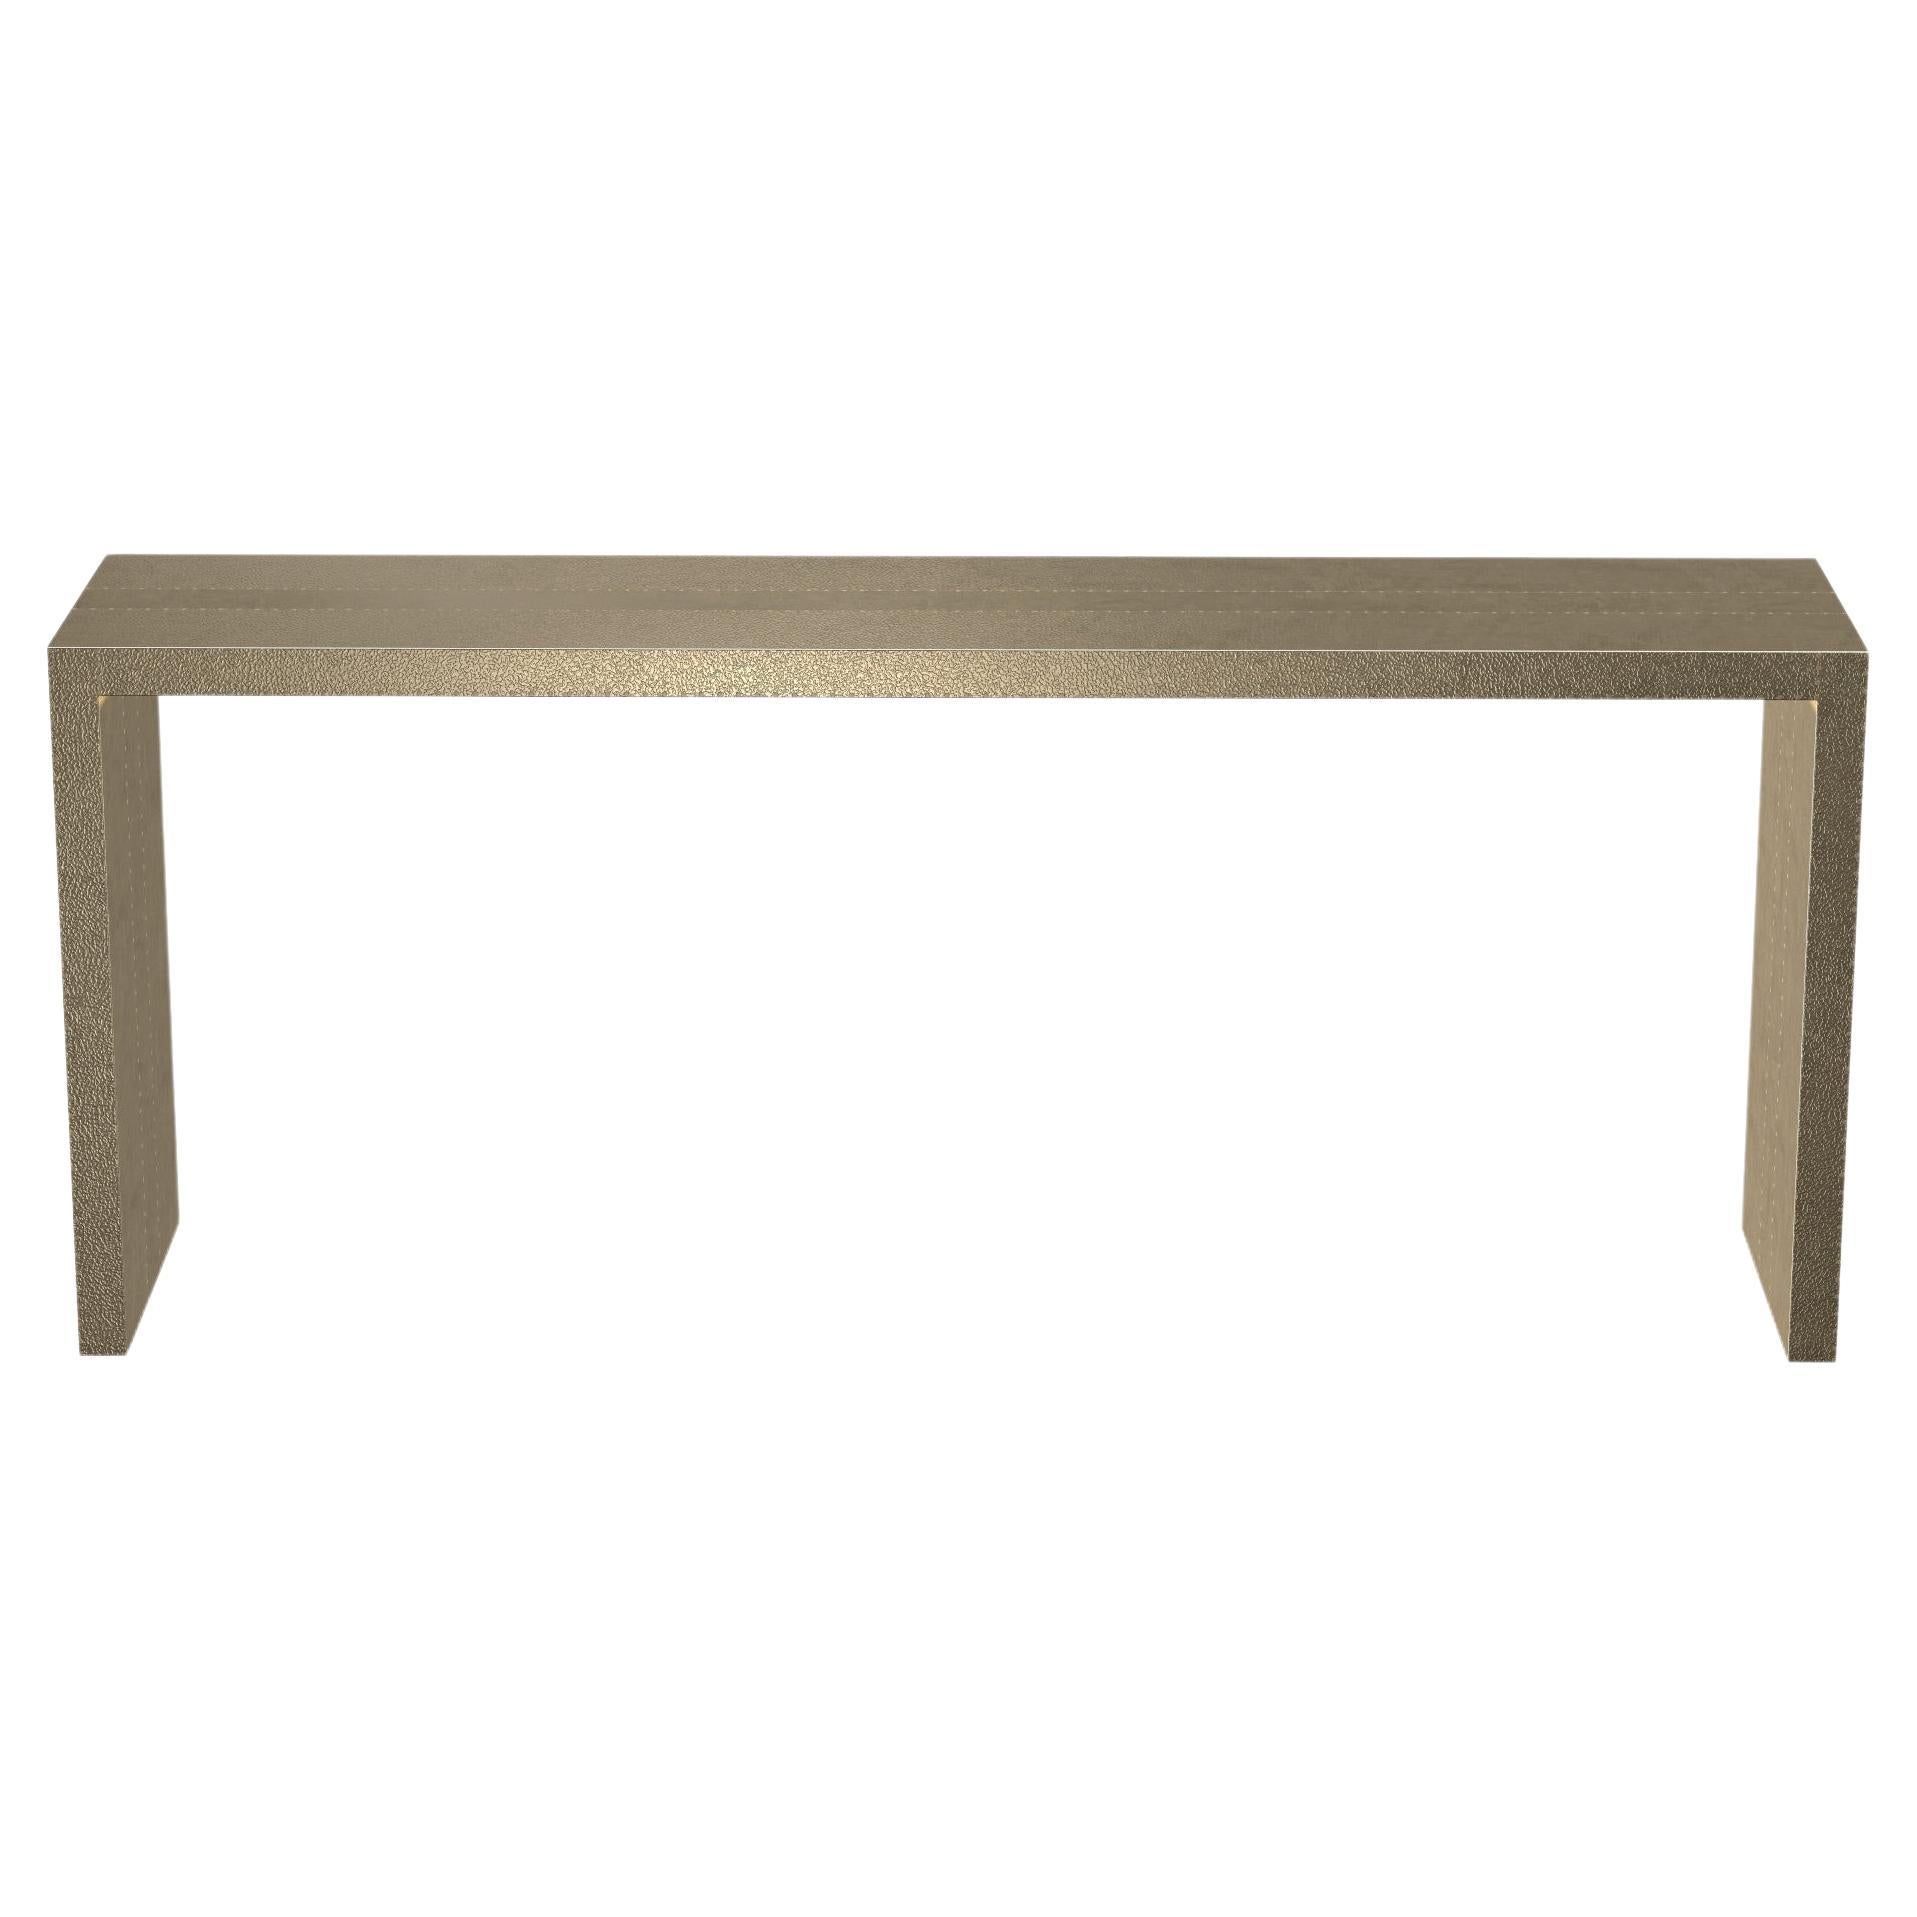 Art Deco Industrial and Work Console Tables in Copper Fine Hammered  by Alison S For Sale